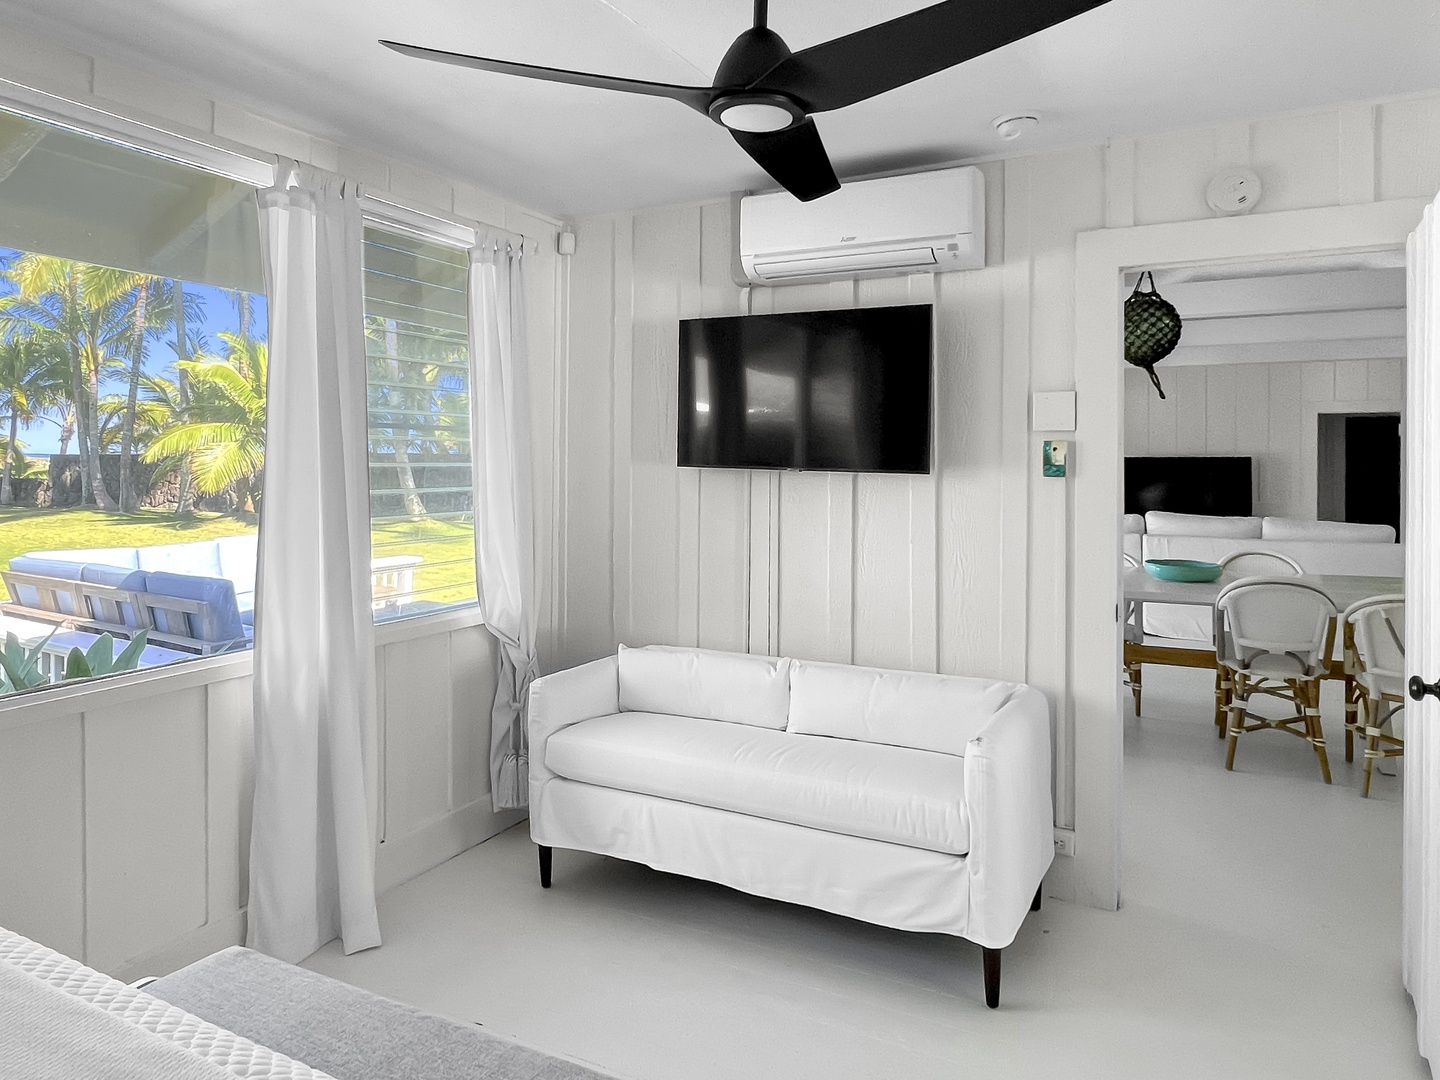 Kailua Vacation Rentals, Kai Mele - The Primary Bedroom comes with a cozy sitting area, tv and split AC